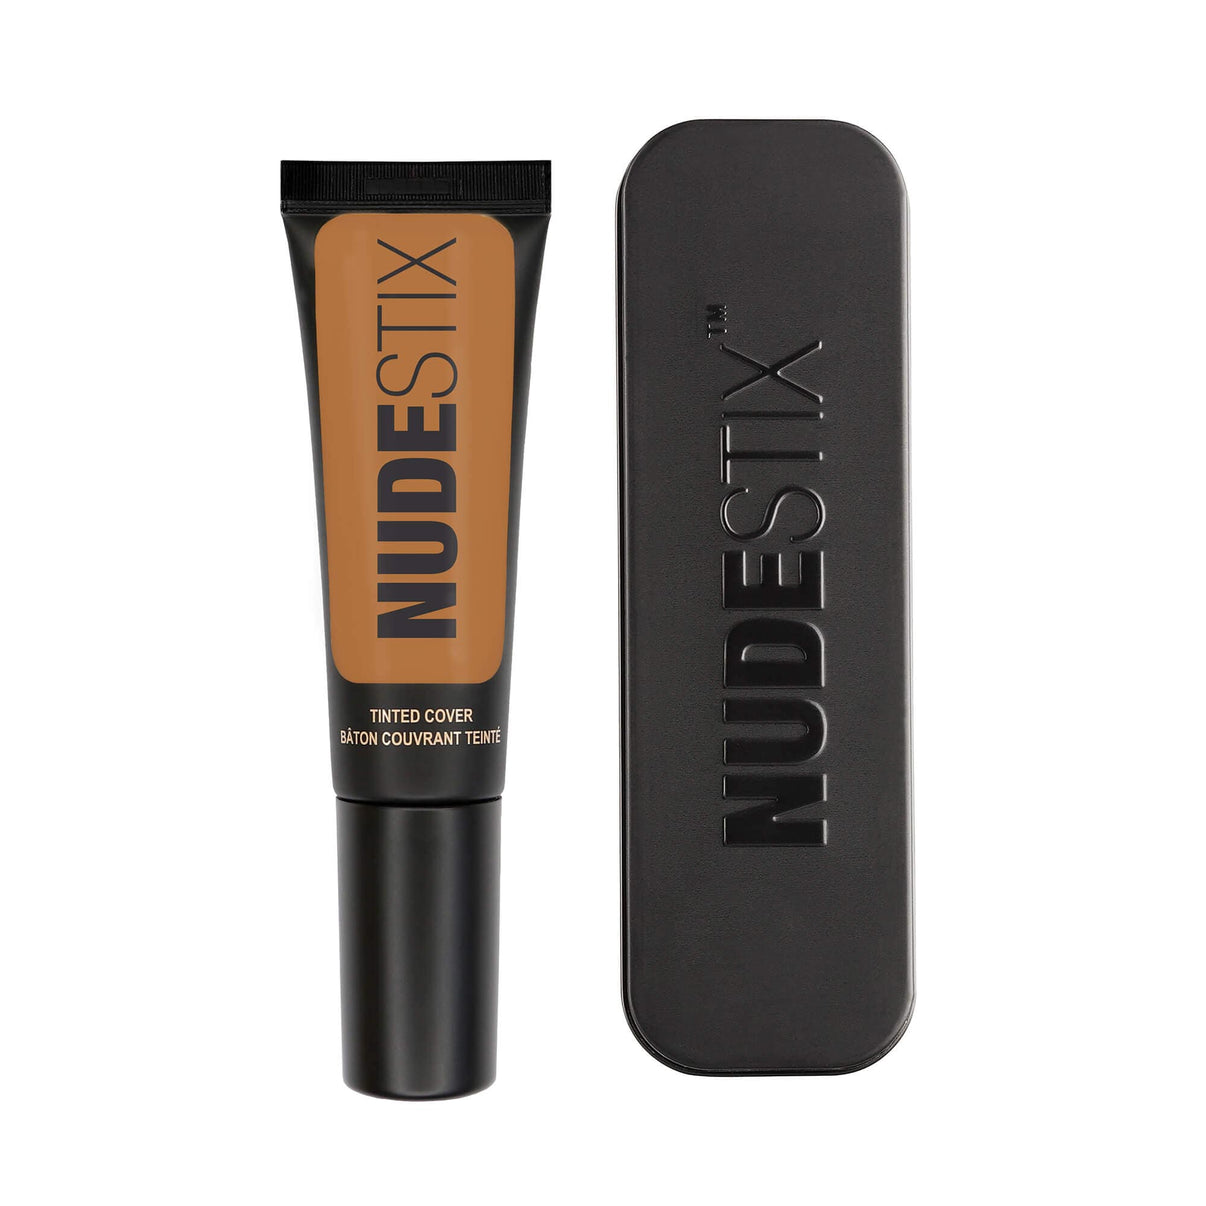 Tinted Cover Liquid Foundation in shade nude 7.5 with Nudestix can